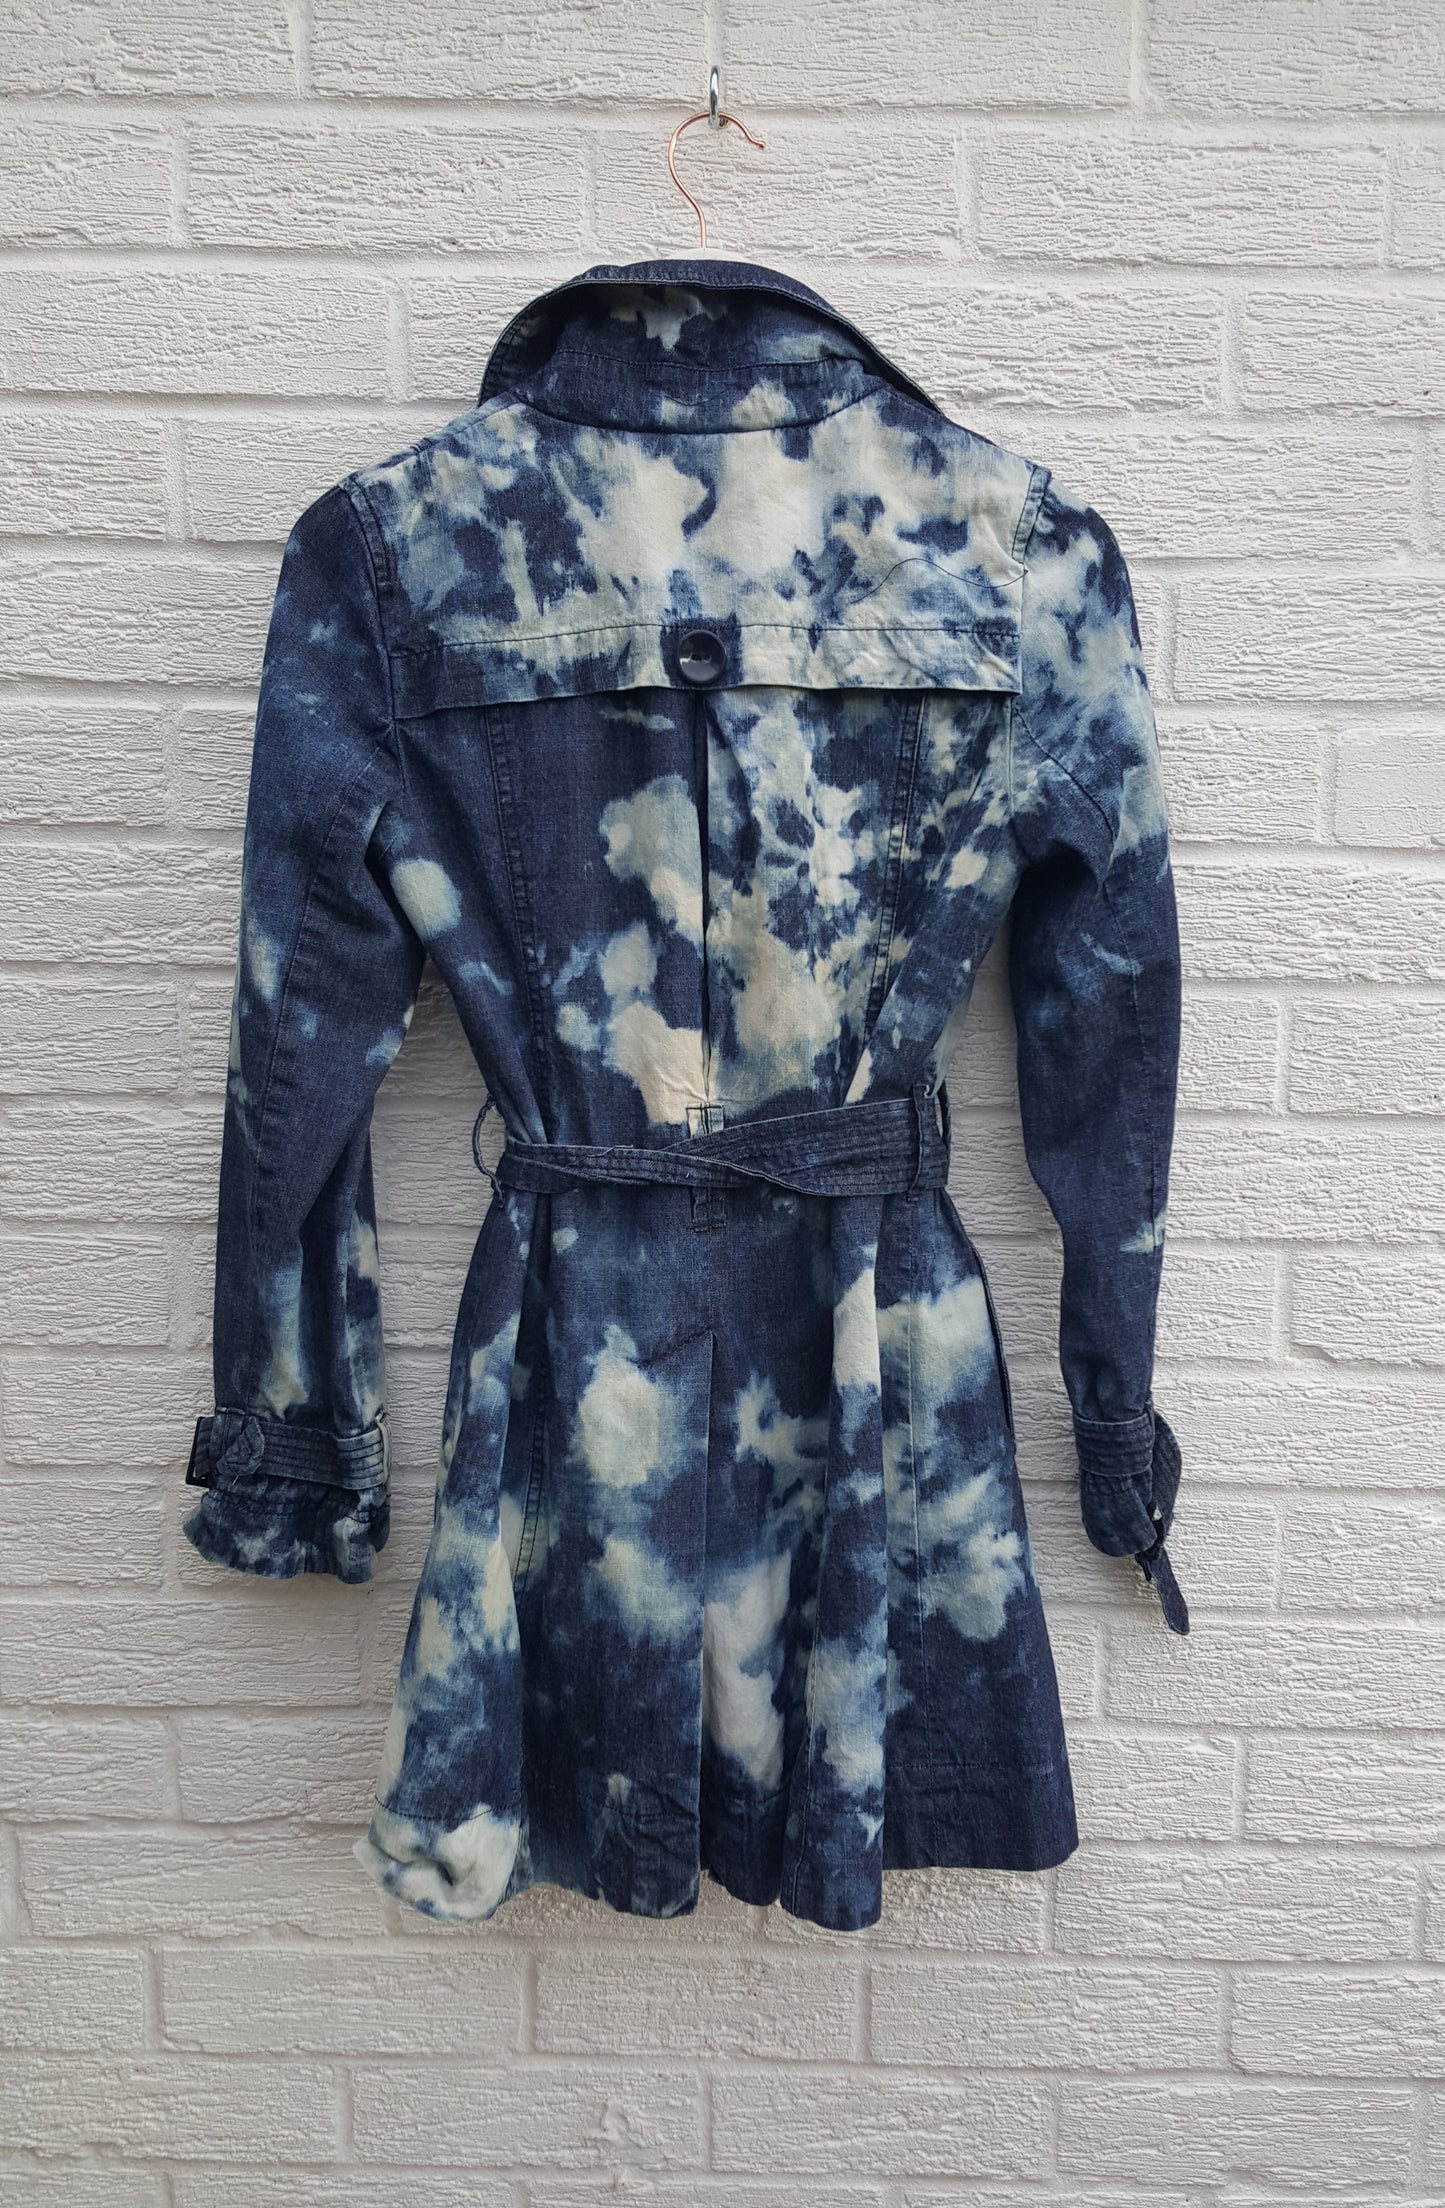 Upcycled denim coat, women's, hand dyed, mac style coat with belt, to fit UK size 10 or US size 6. This beautiful one of a kind coat is upcycled, so it's not just one of it's kind! It's also sustainable, ethical & friendly to the environment too! Hand dyed in the UK by AbiDashery. Only one available.   We only use recycled and compostable packaging!